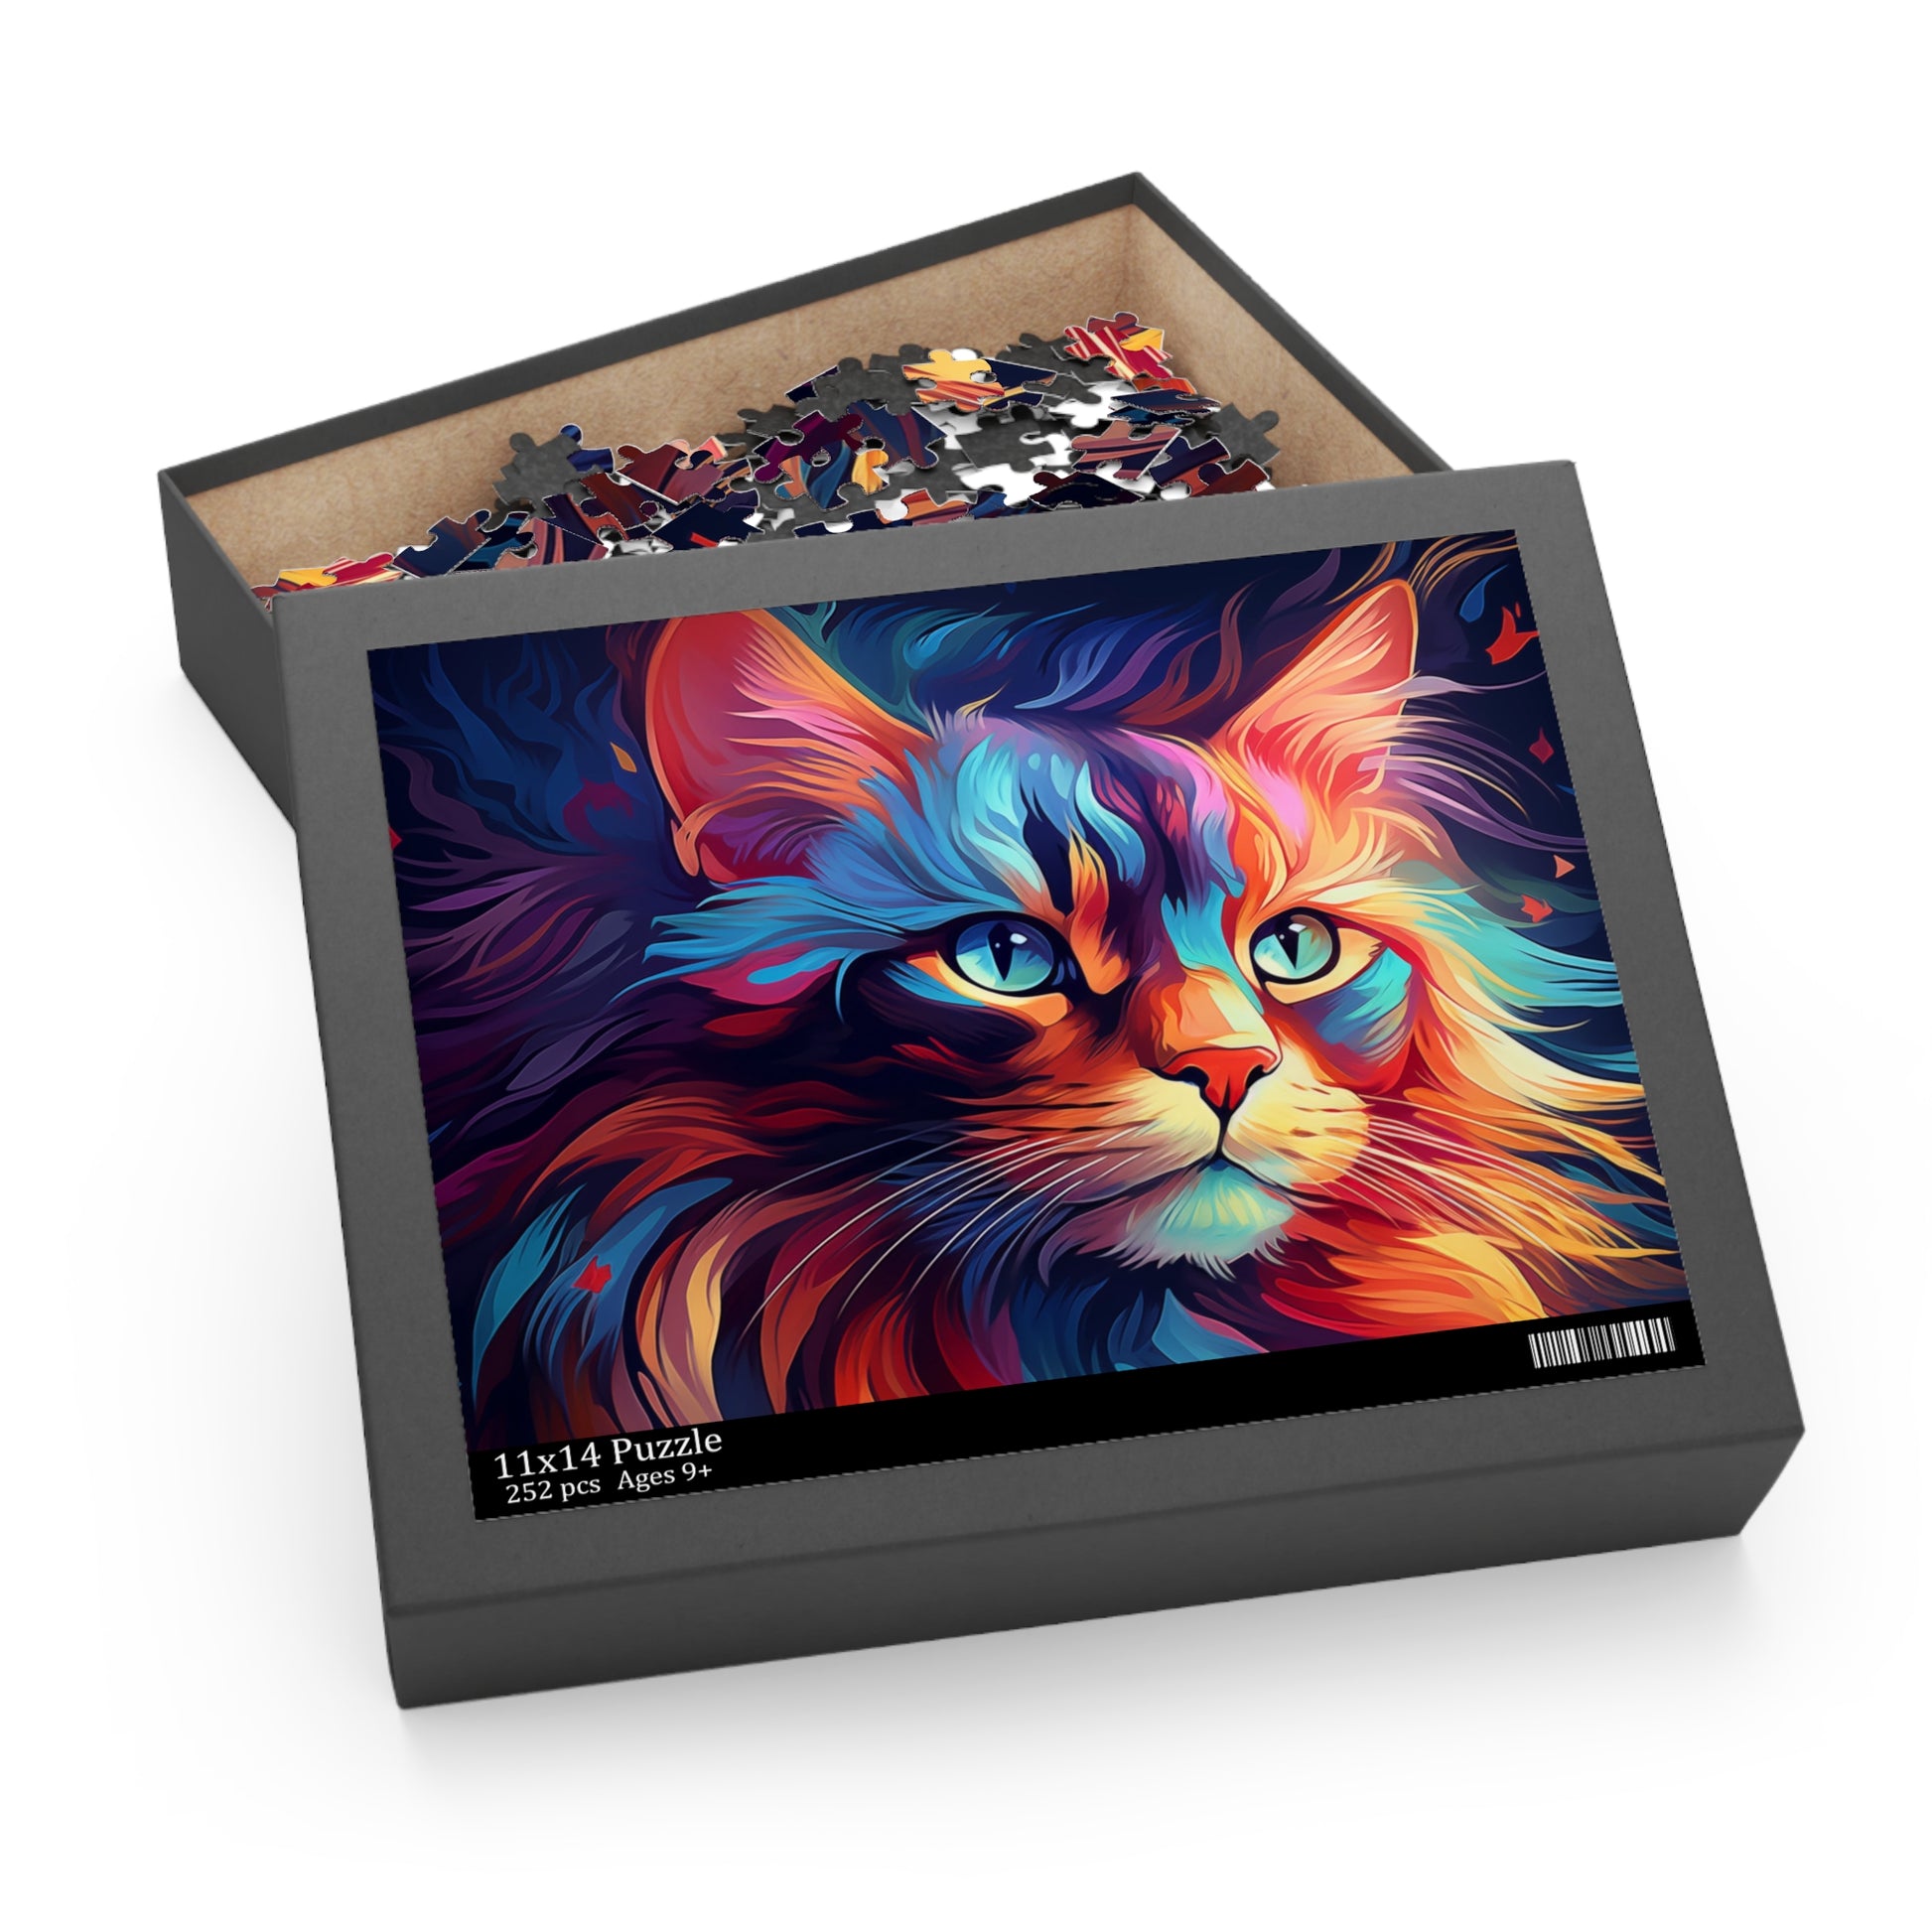 Vibrant Abstract Watercolor Cat Jigsaw Puzzle for Boys, Girls, Kids Adult Birthday Business Jigsaw Puzzle Gift for Him Funny Humorous Indoor Outdoor Game Gift For Her Online-8